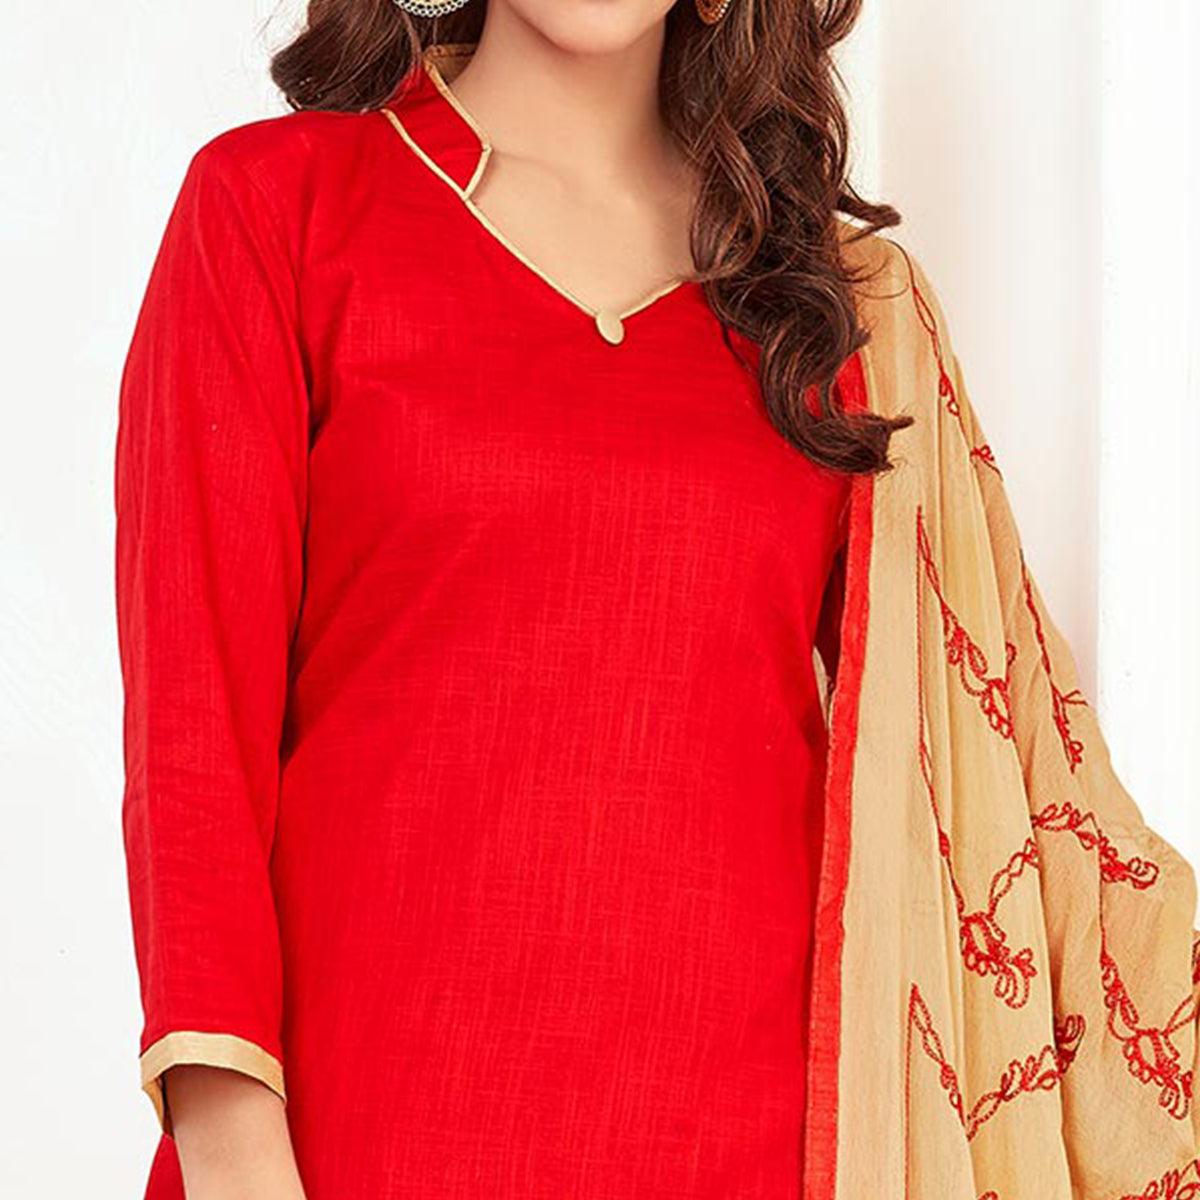 Invaluable Red Colored Casual Wear Cotton Suit - Peachmode